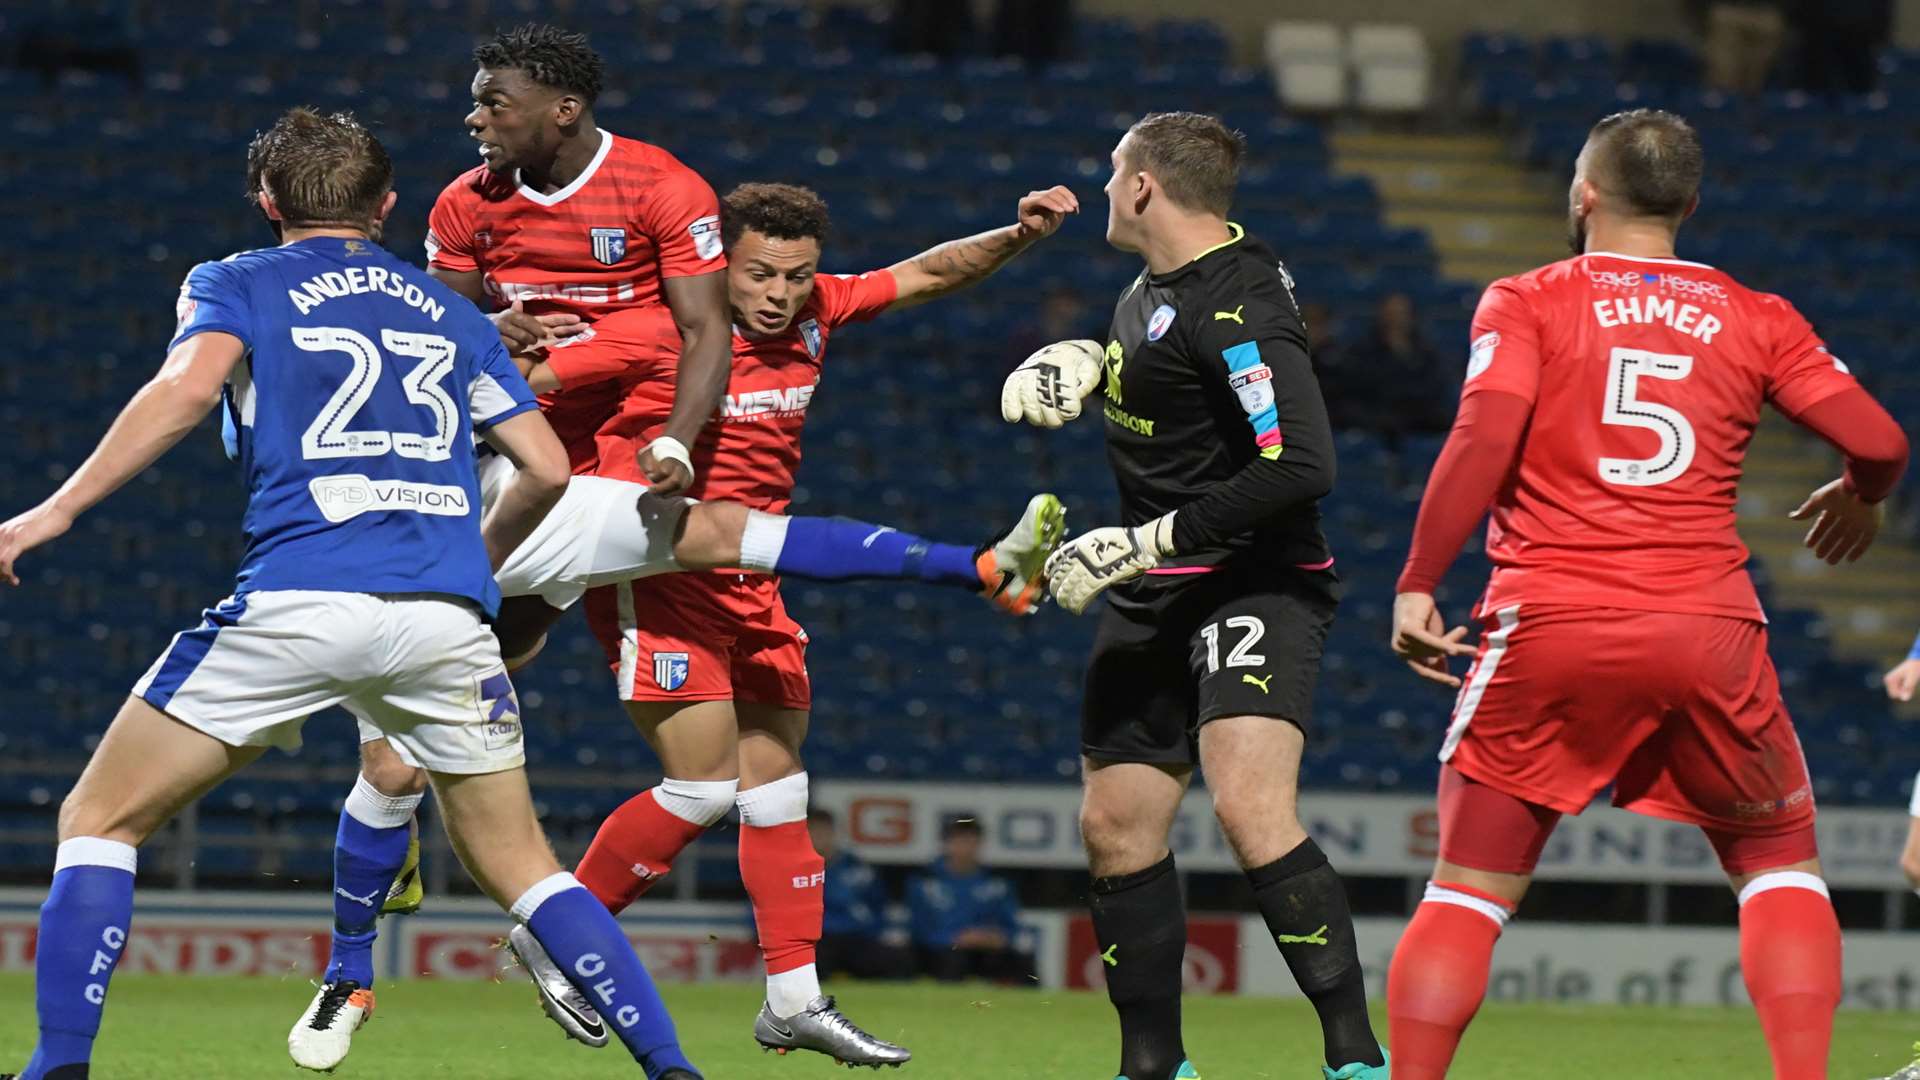 Deji Oshilaja causes panic in the Spireites defence Picture: Barry Goodwin